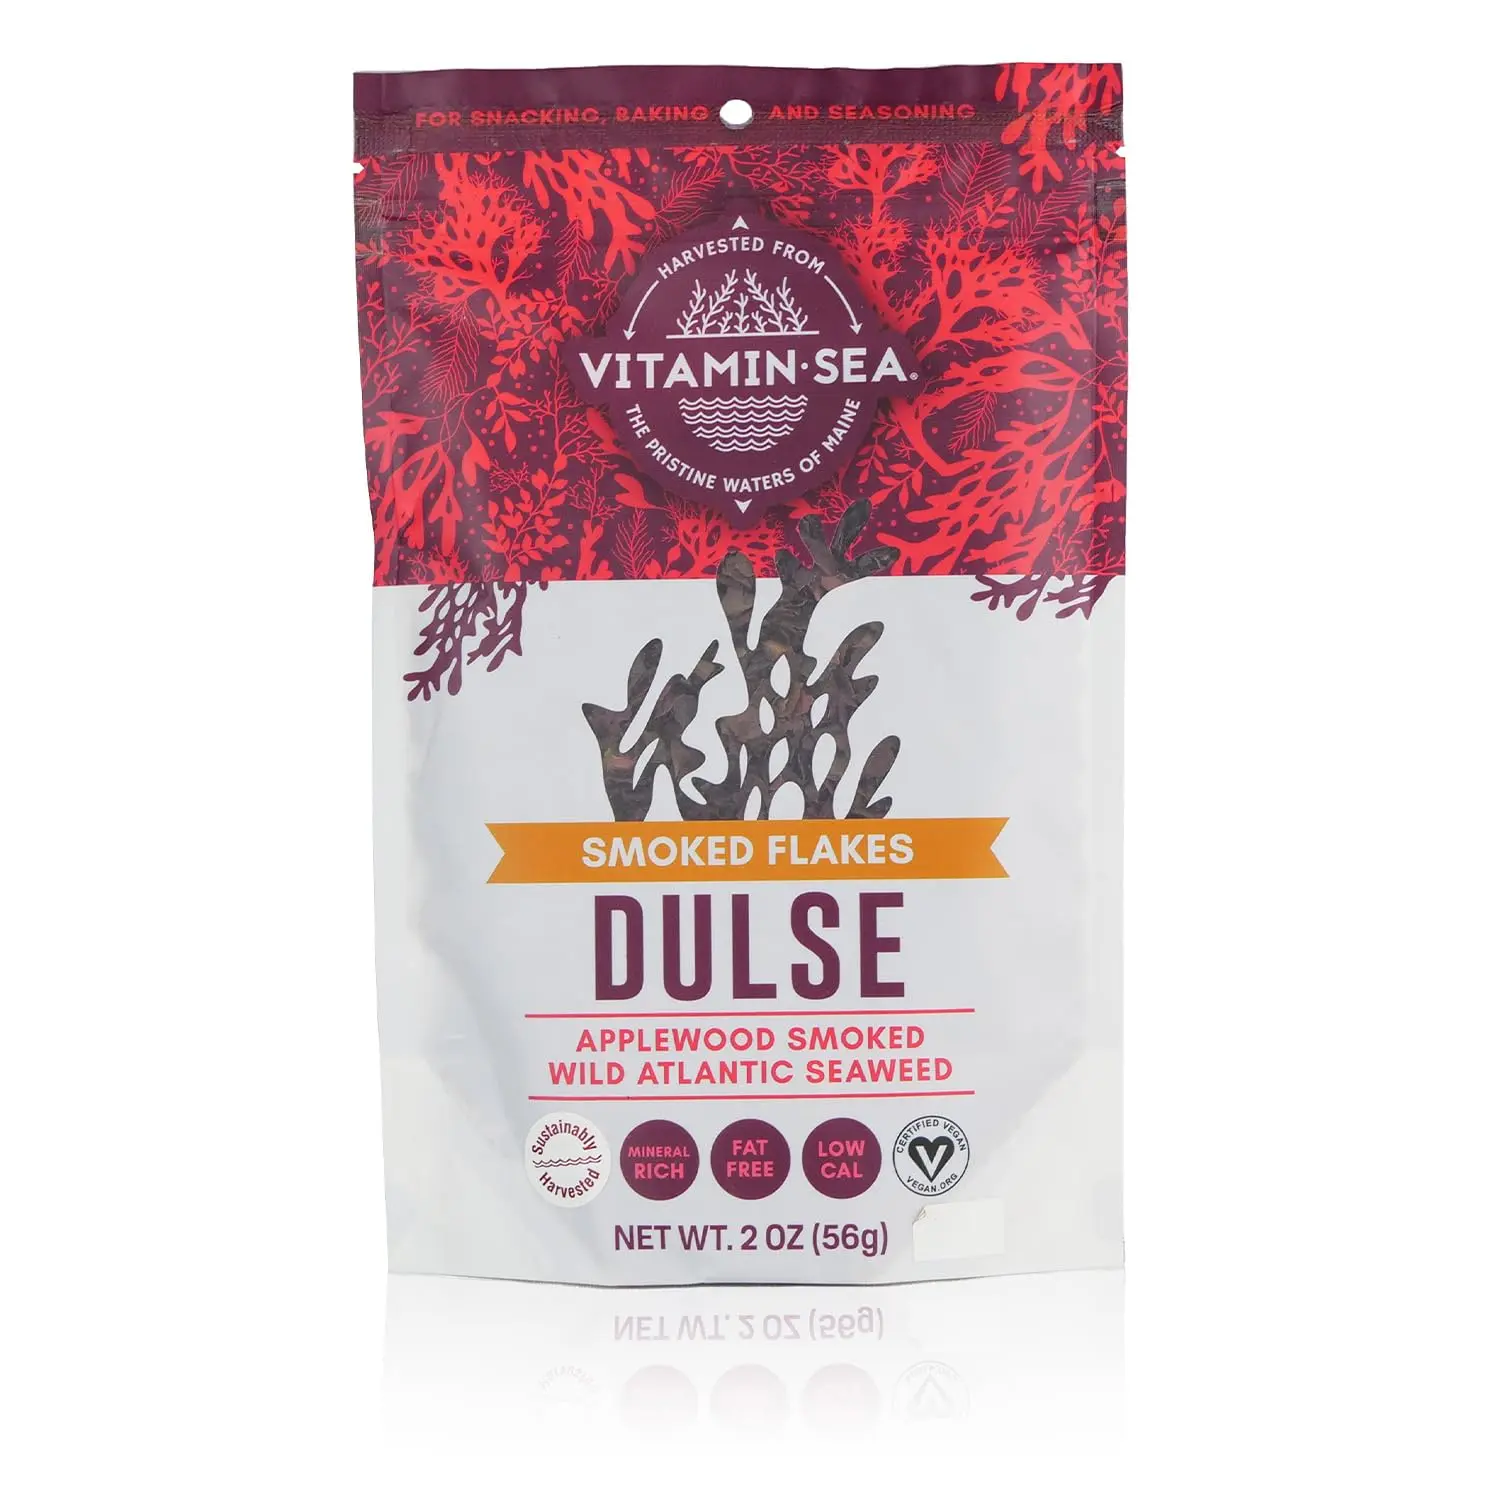 applewood smoked dulse - What are the benefits of dulse for thyroid